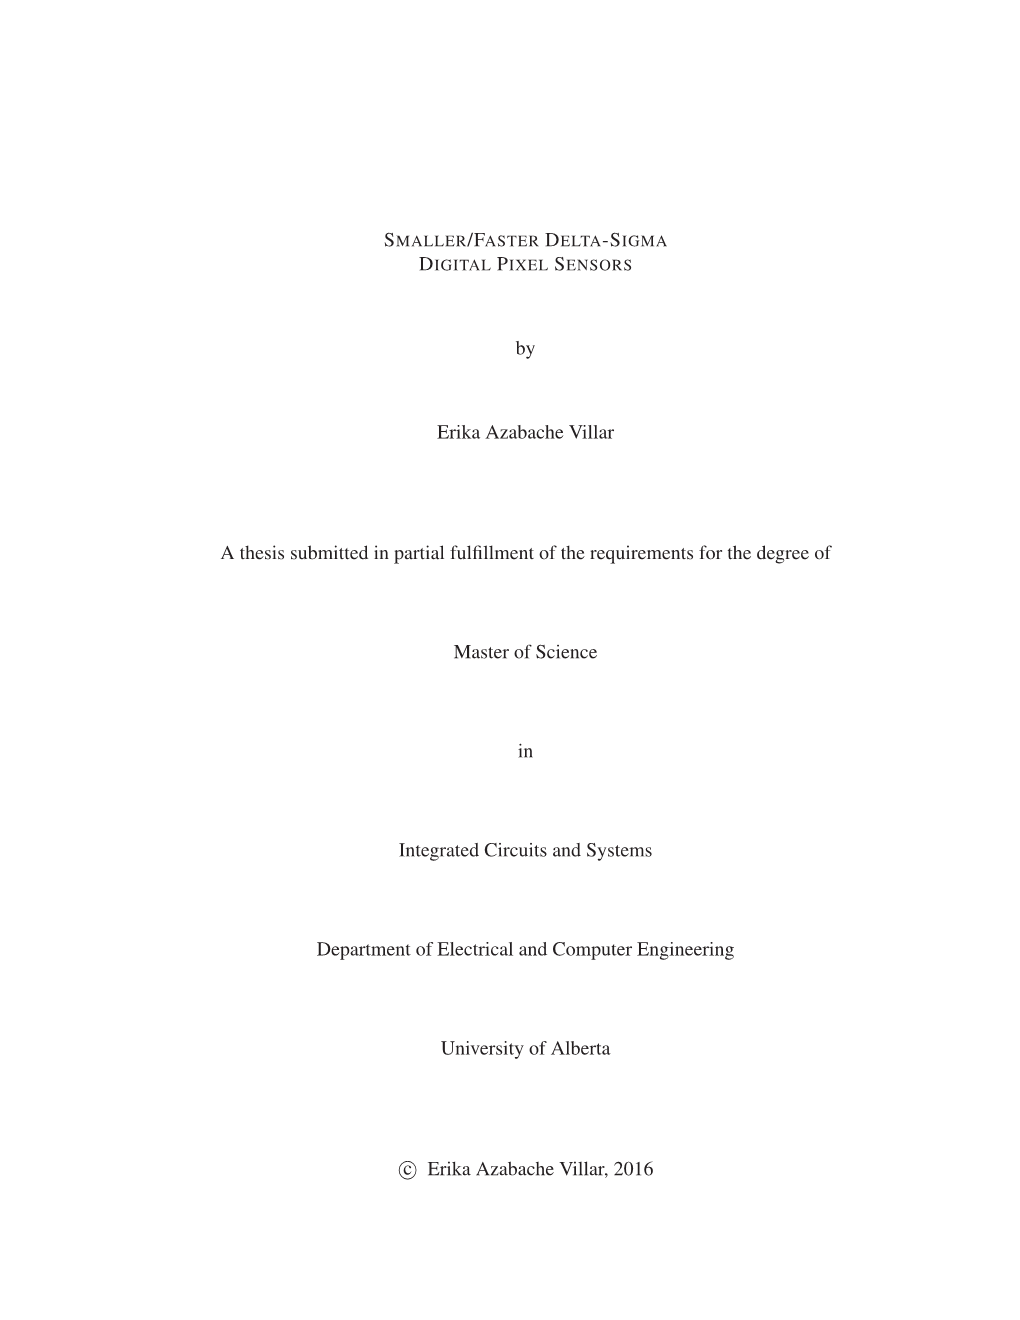 By Erika Azabache Villar a Thesis Submitted in Partial Fulfillment of The